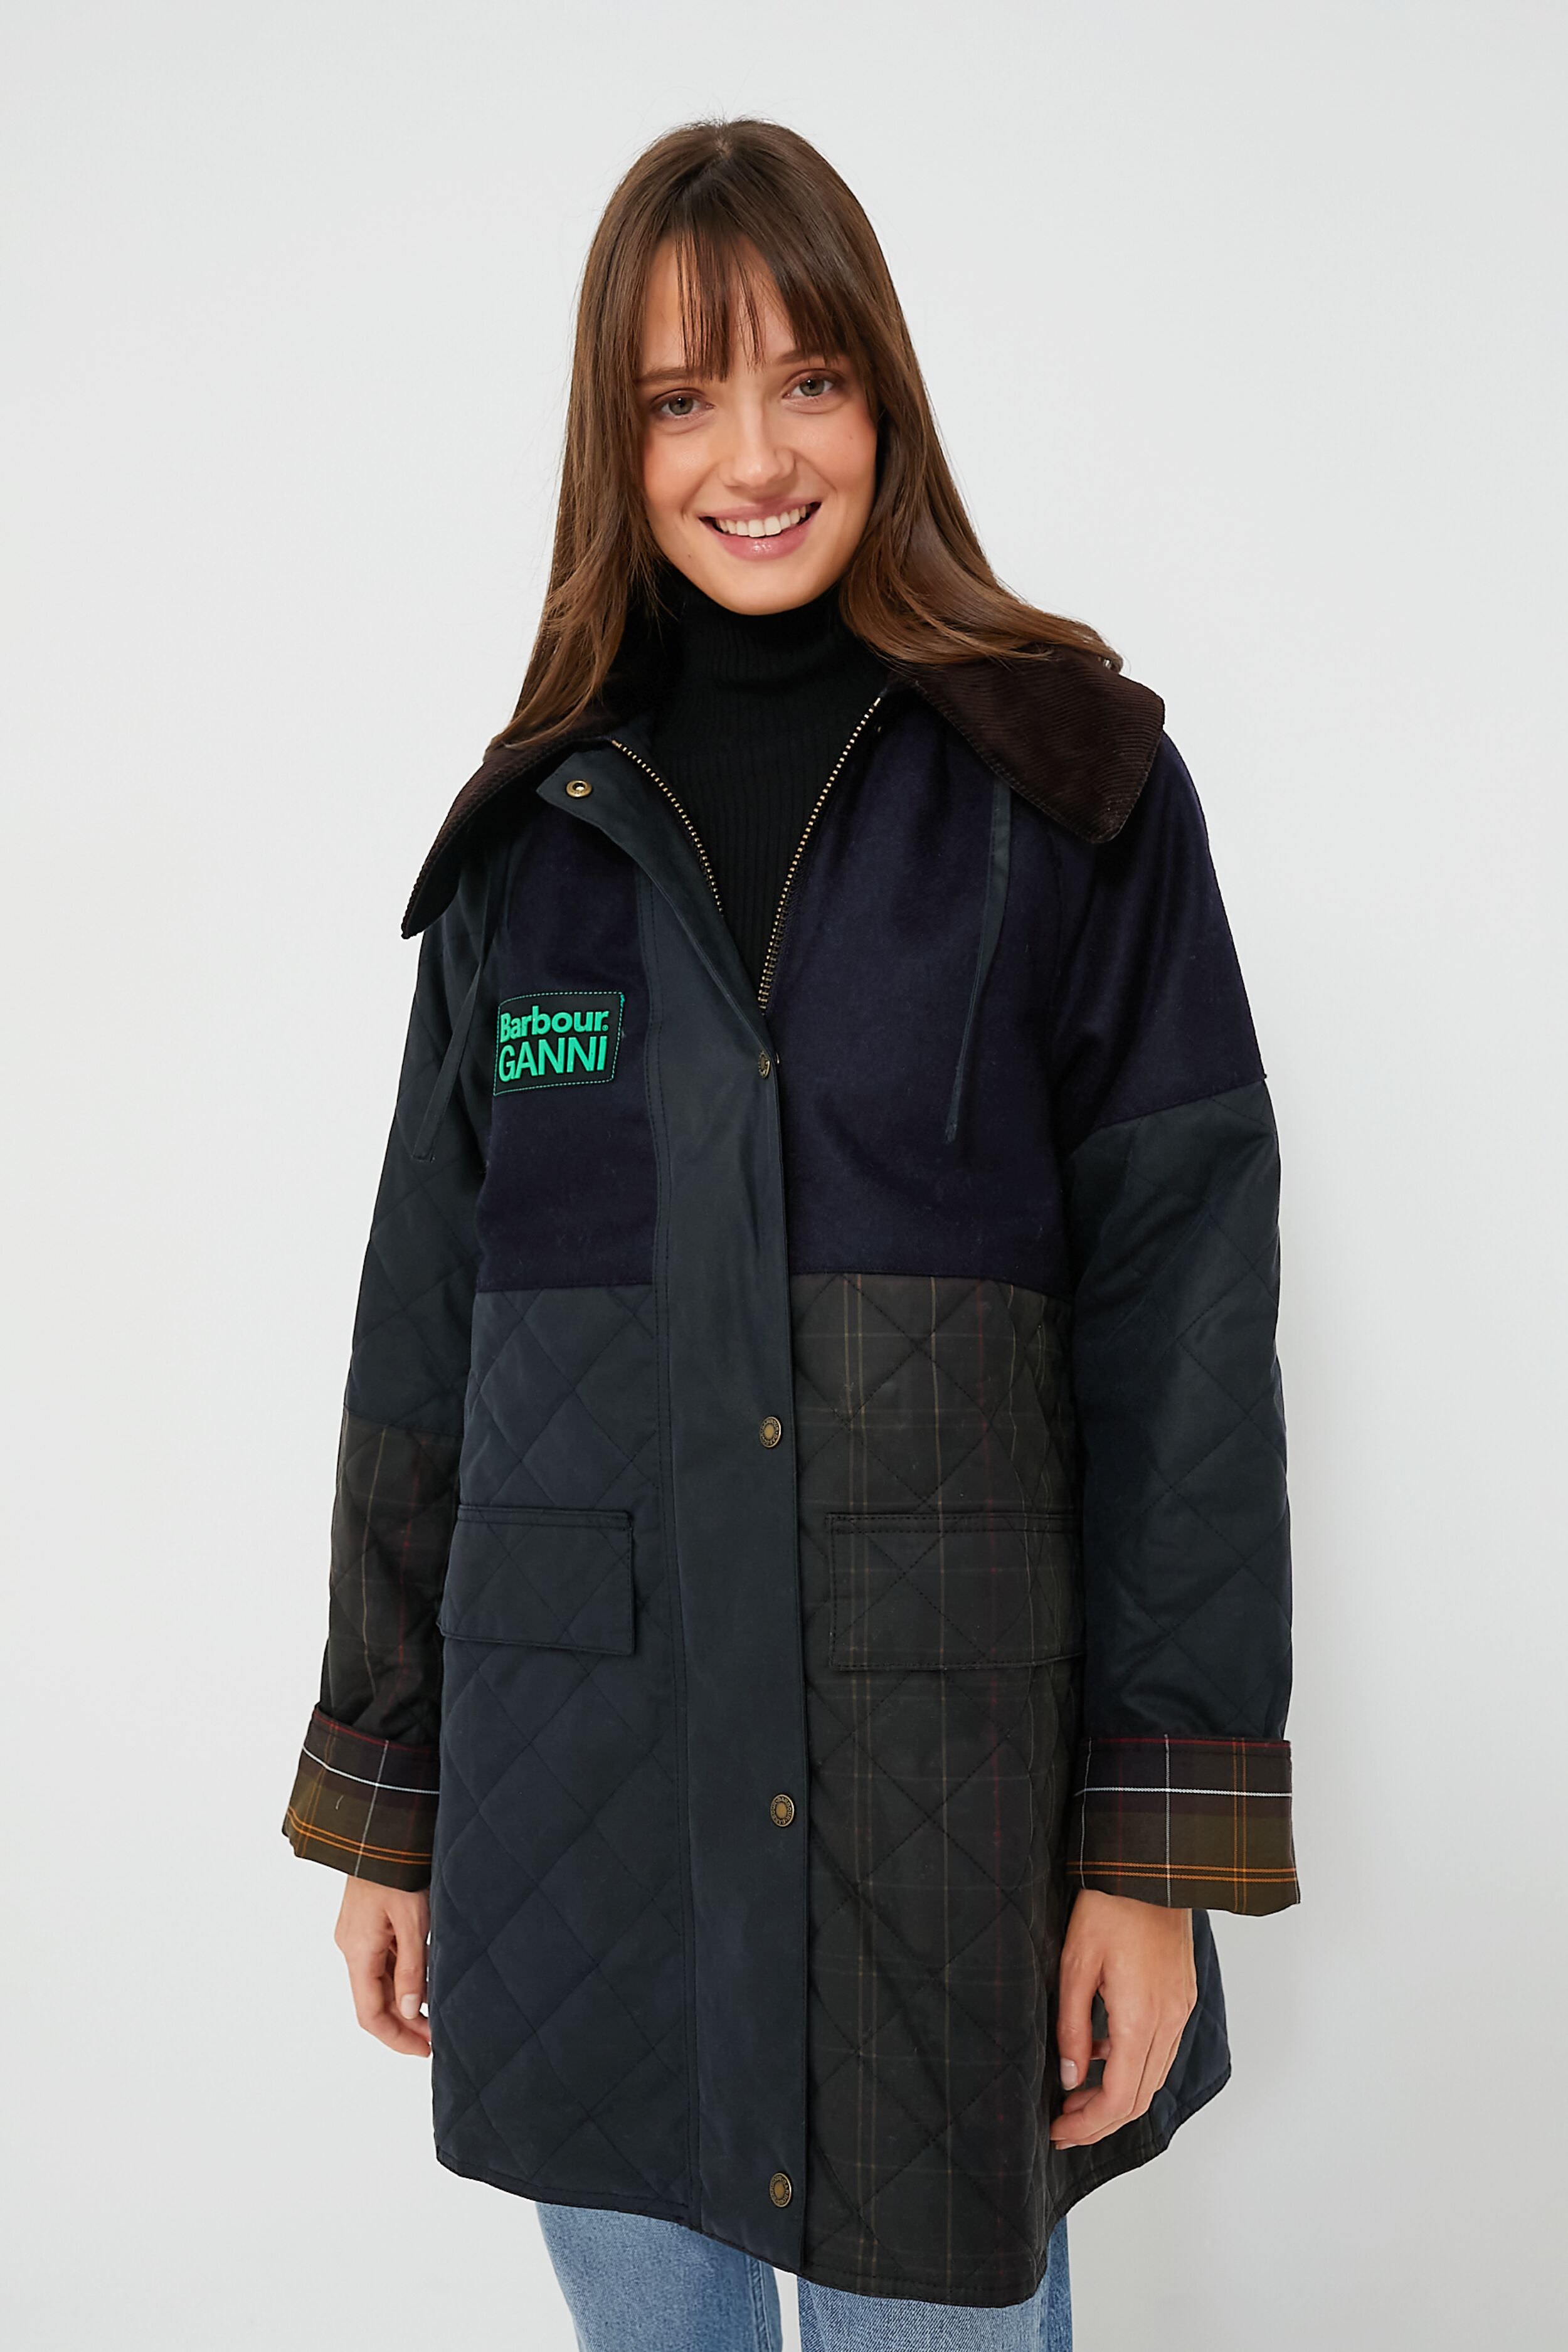 Navy Classic Barbour Ganni Burghley Jacket